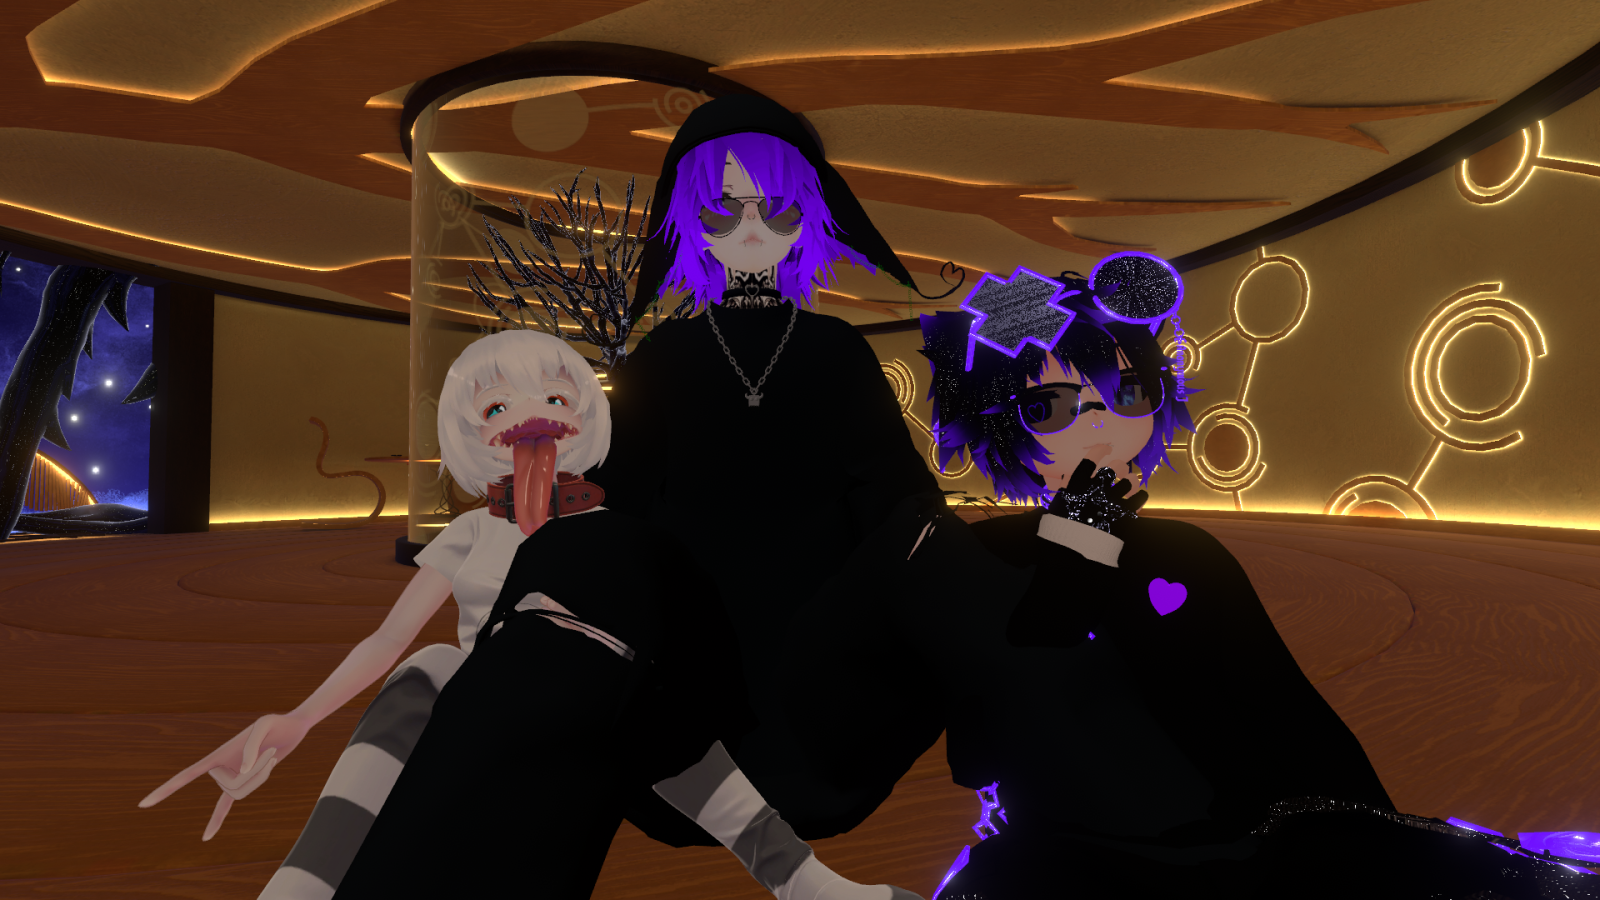 VRChat_1920x1080_2022-05-14_02-00-50.095.png